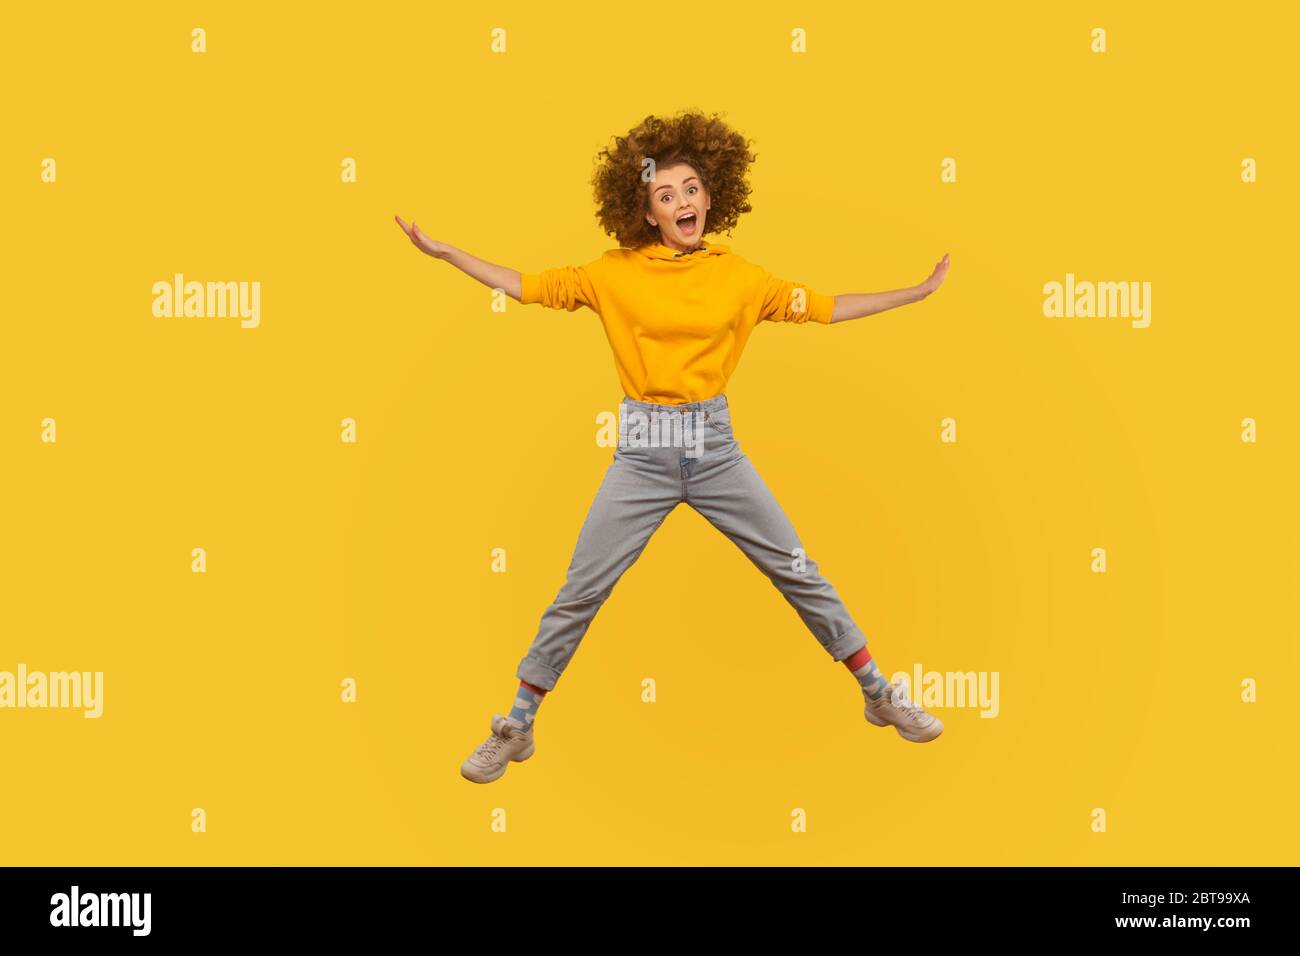 Portrait of enthusiastic excited curly-haired girl in urban style hoodie and jeans jumping high in air, flying and shouting with amazed happy expressi Stock Photo